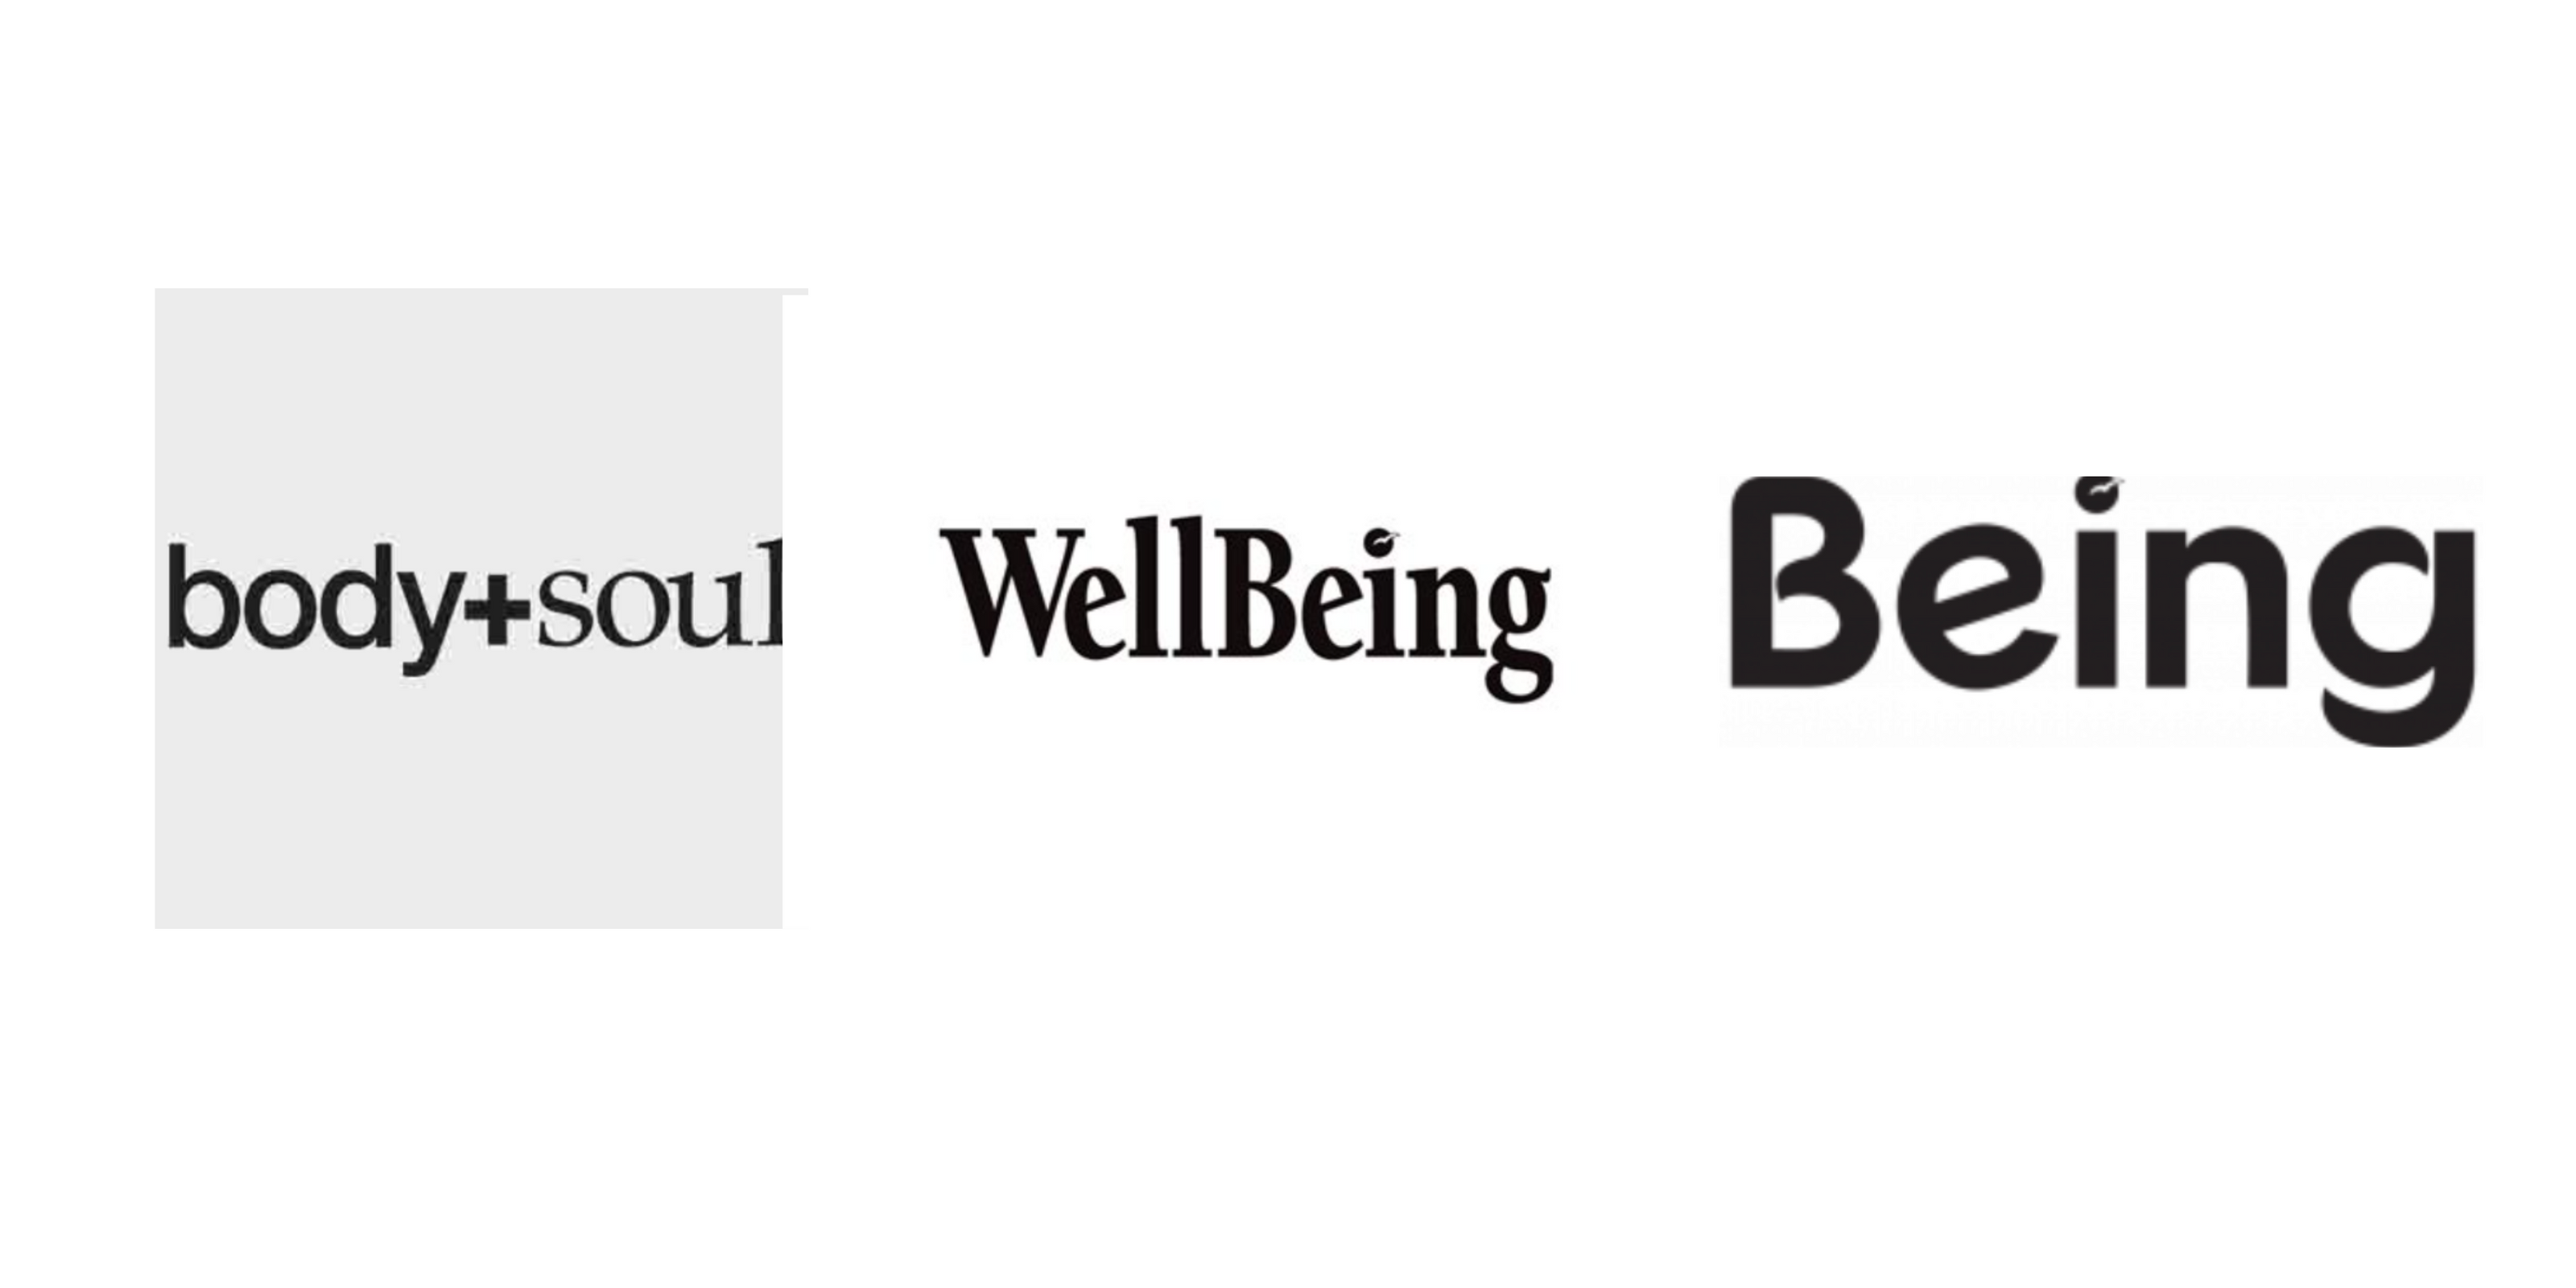 Body + Soul, Wellbeing and being magazine articles